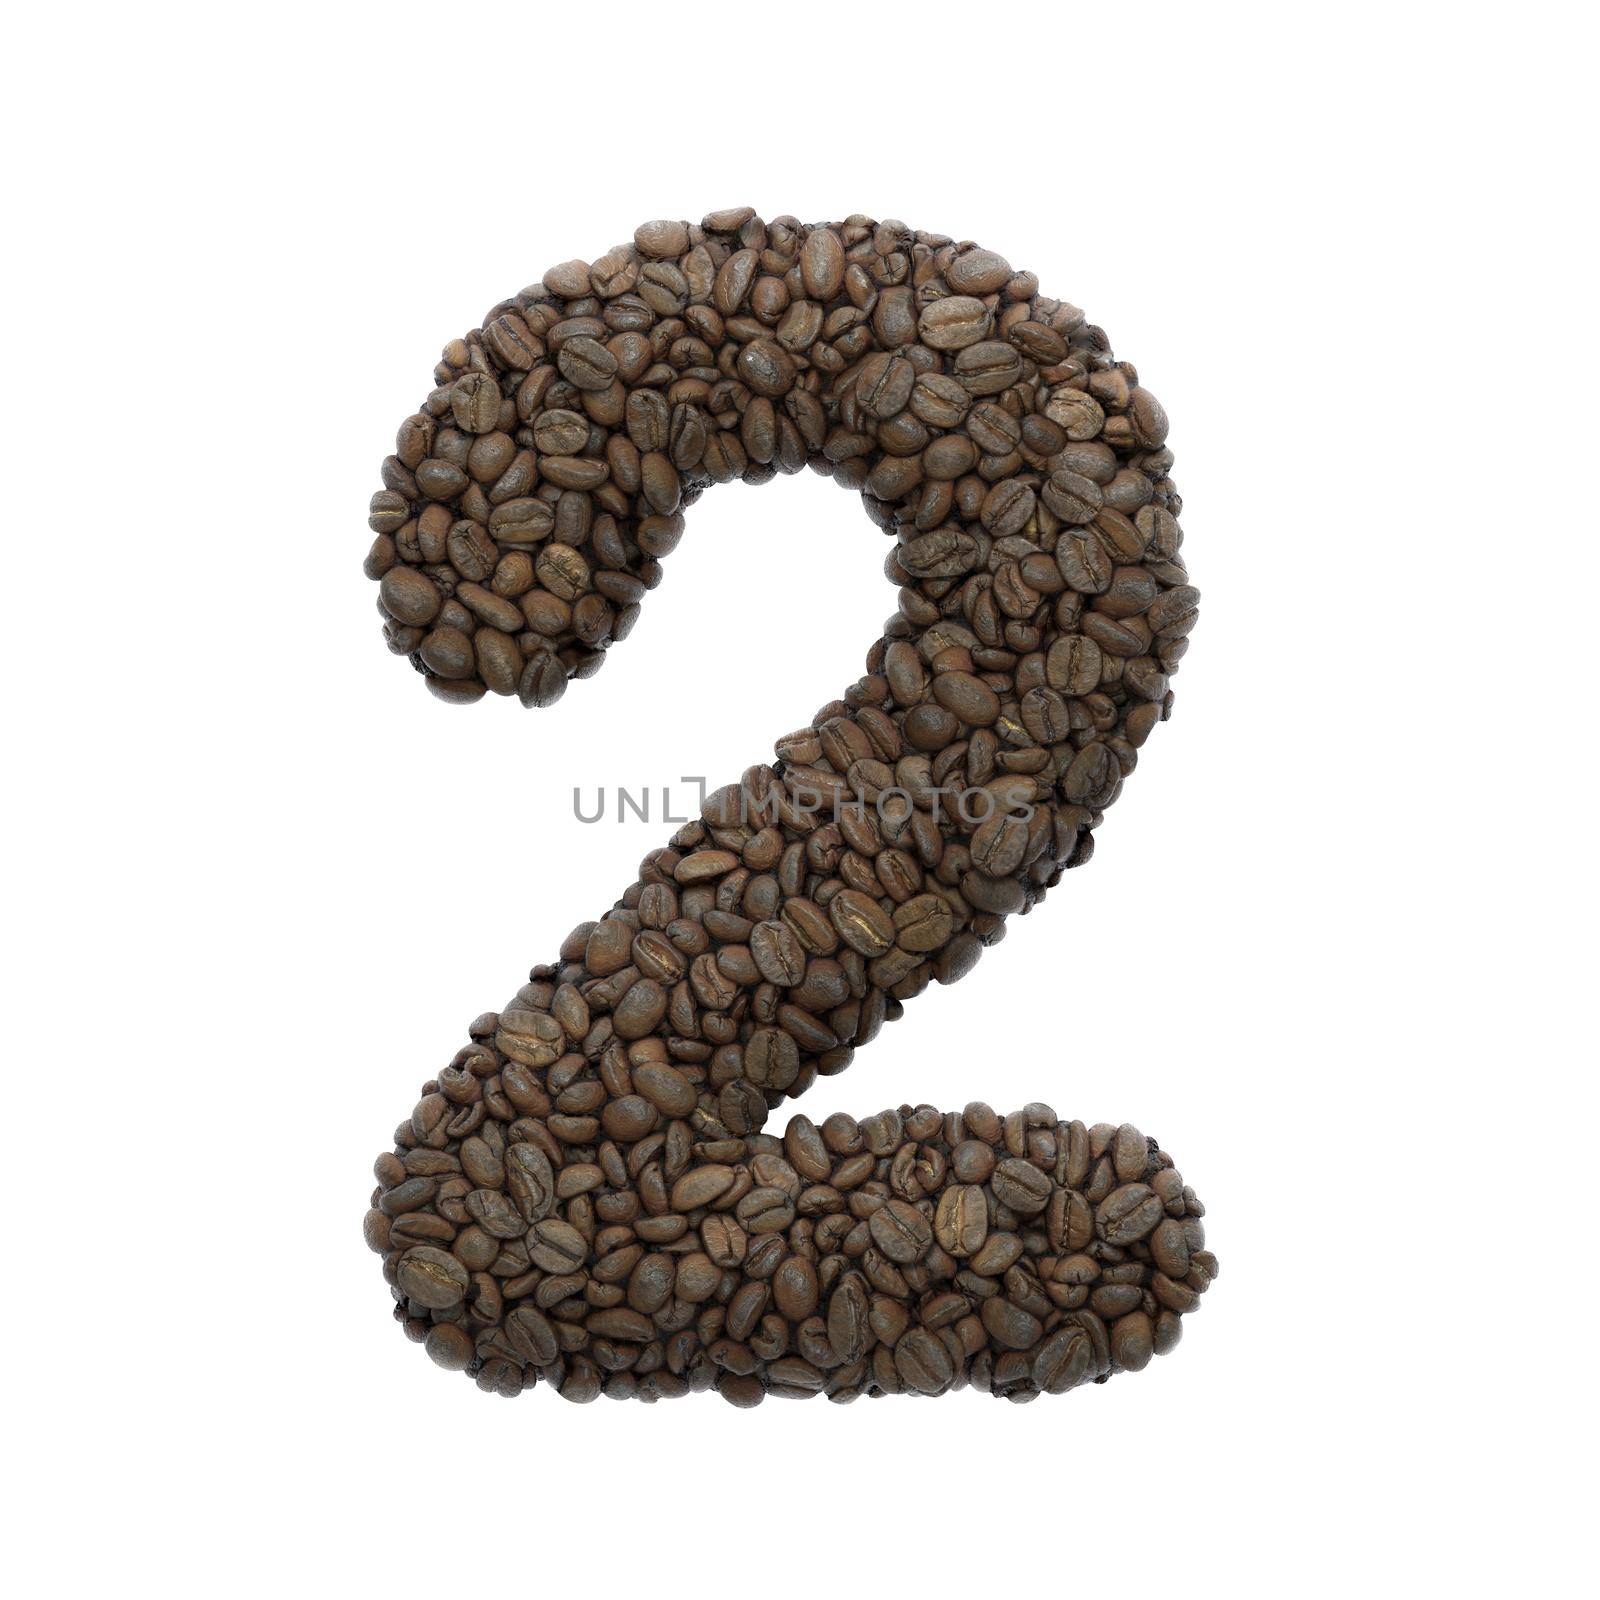 Coffee number 2 - 3d roasted beans digit isolated on white background. This alphabet is perfect for creative illustrations related but not limited to Coffee, energy, insomnia...